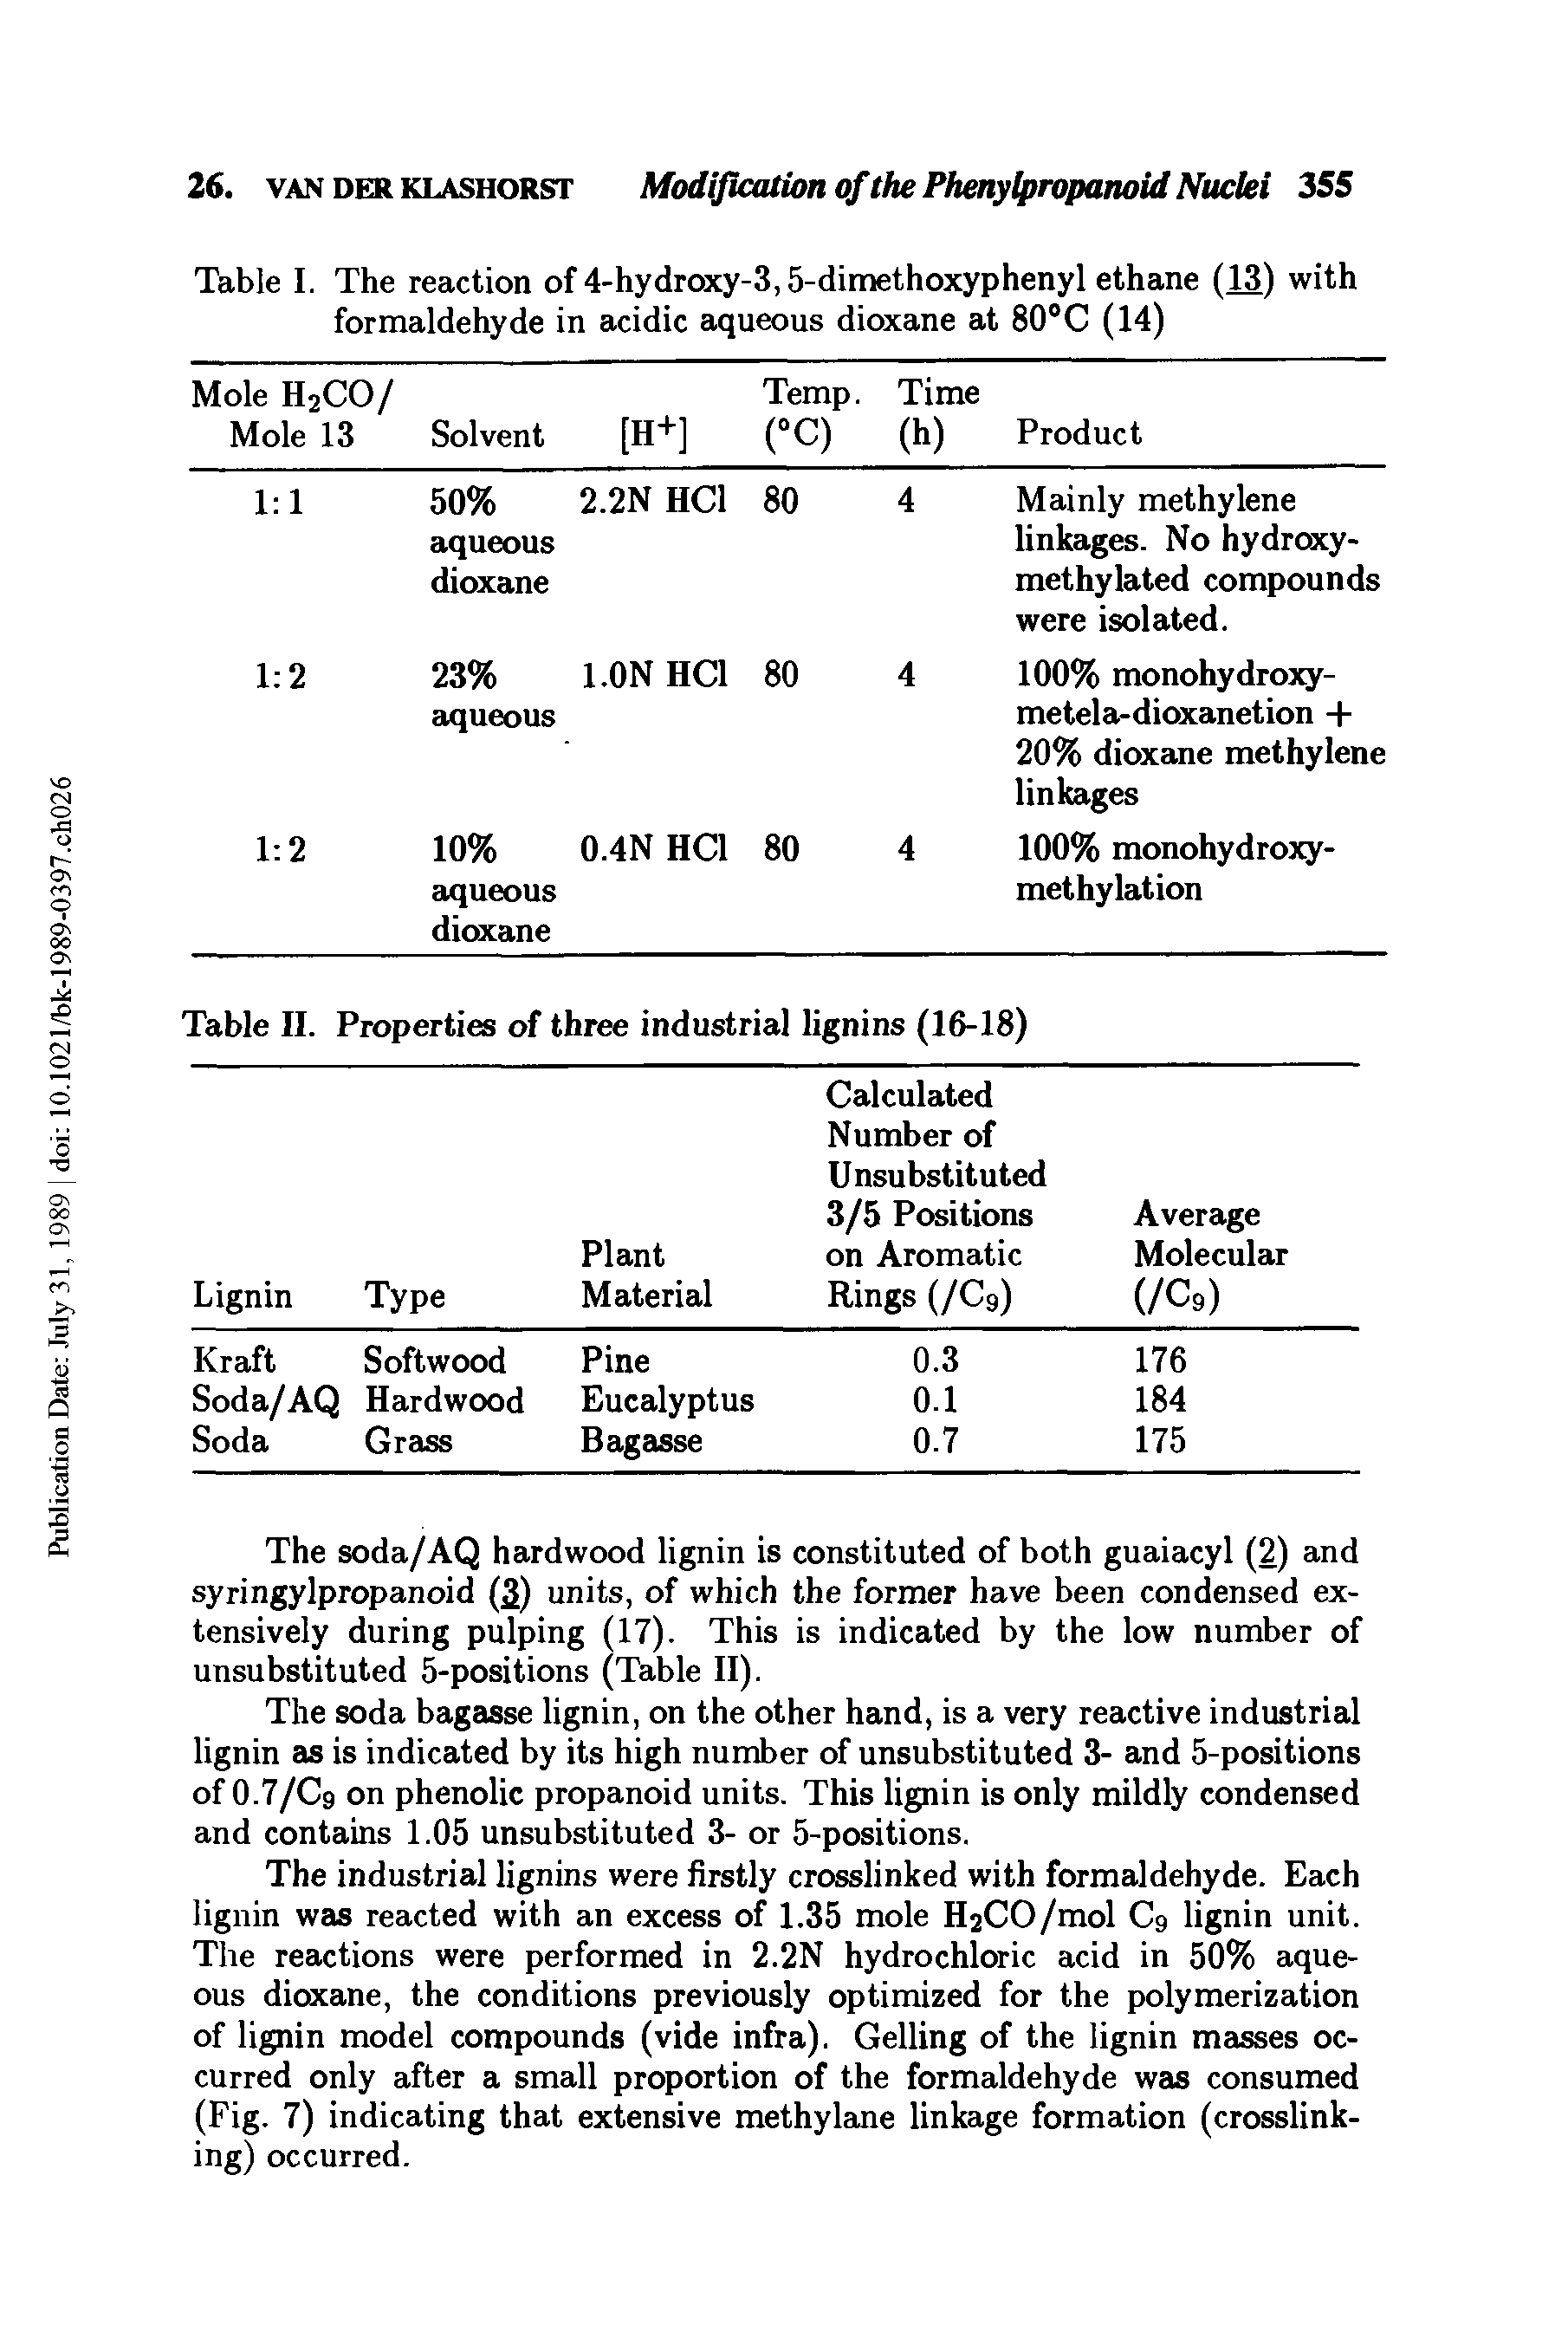 Table I. The reaction of 4-hydroxy-3,5-dimethoxyphenyl ethane (13) with formaldehyde in acidic aqueous dioxane at 80°C (14)...